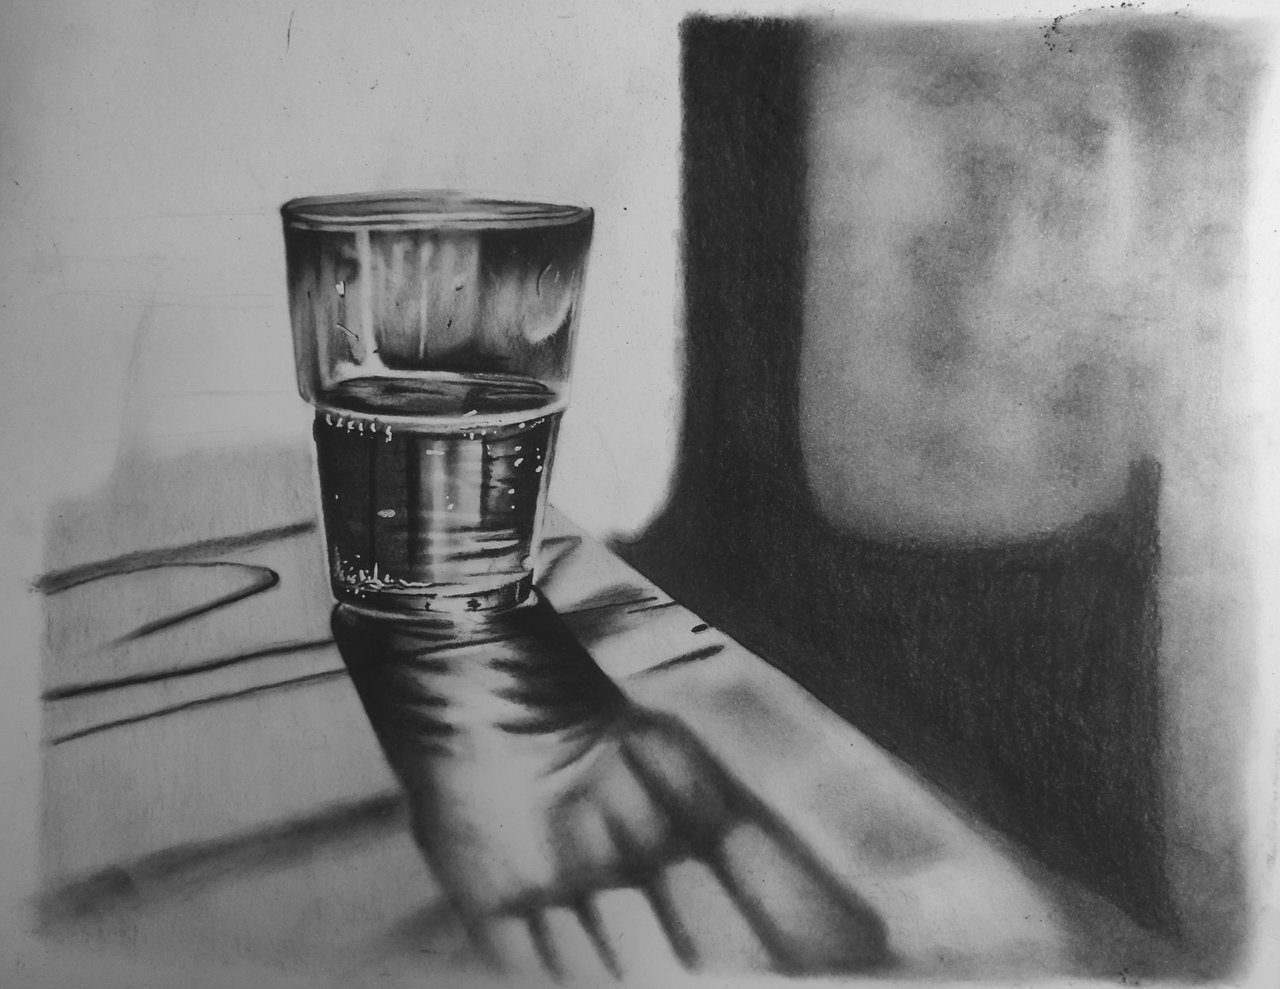 Charcoal drawing